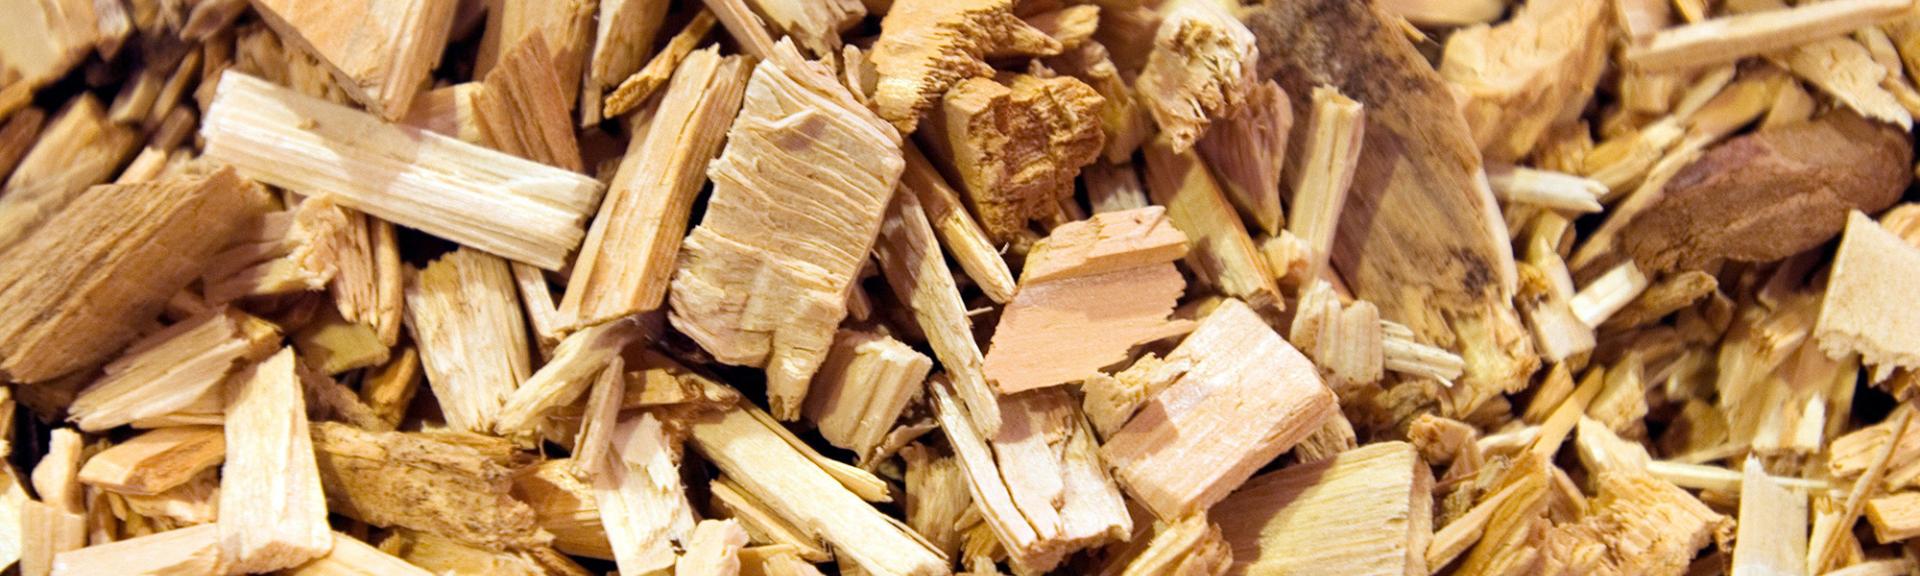 G3 wood chips